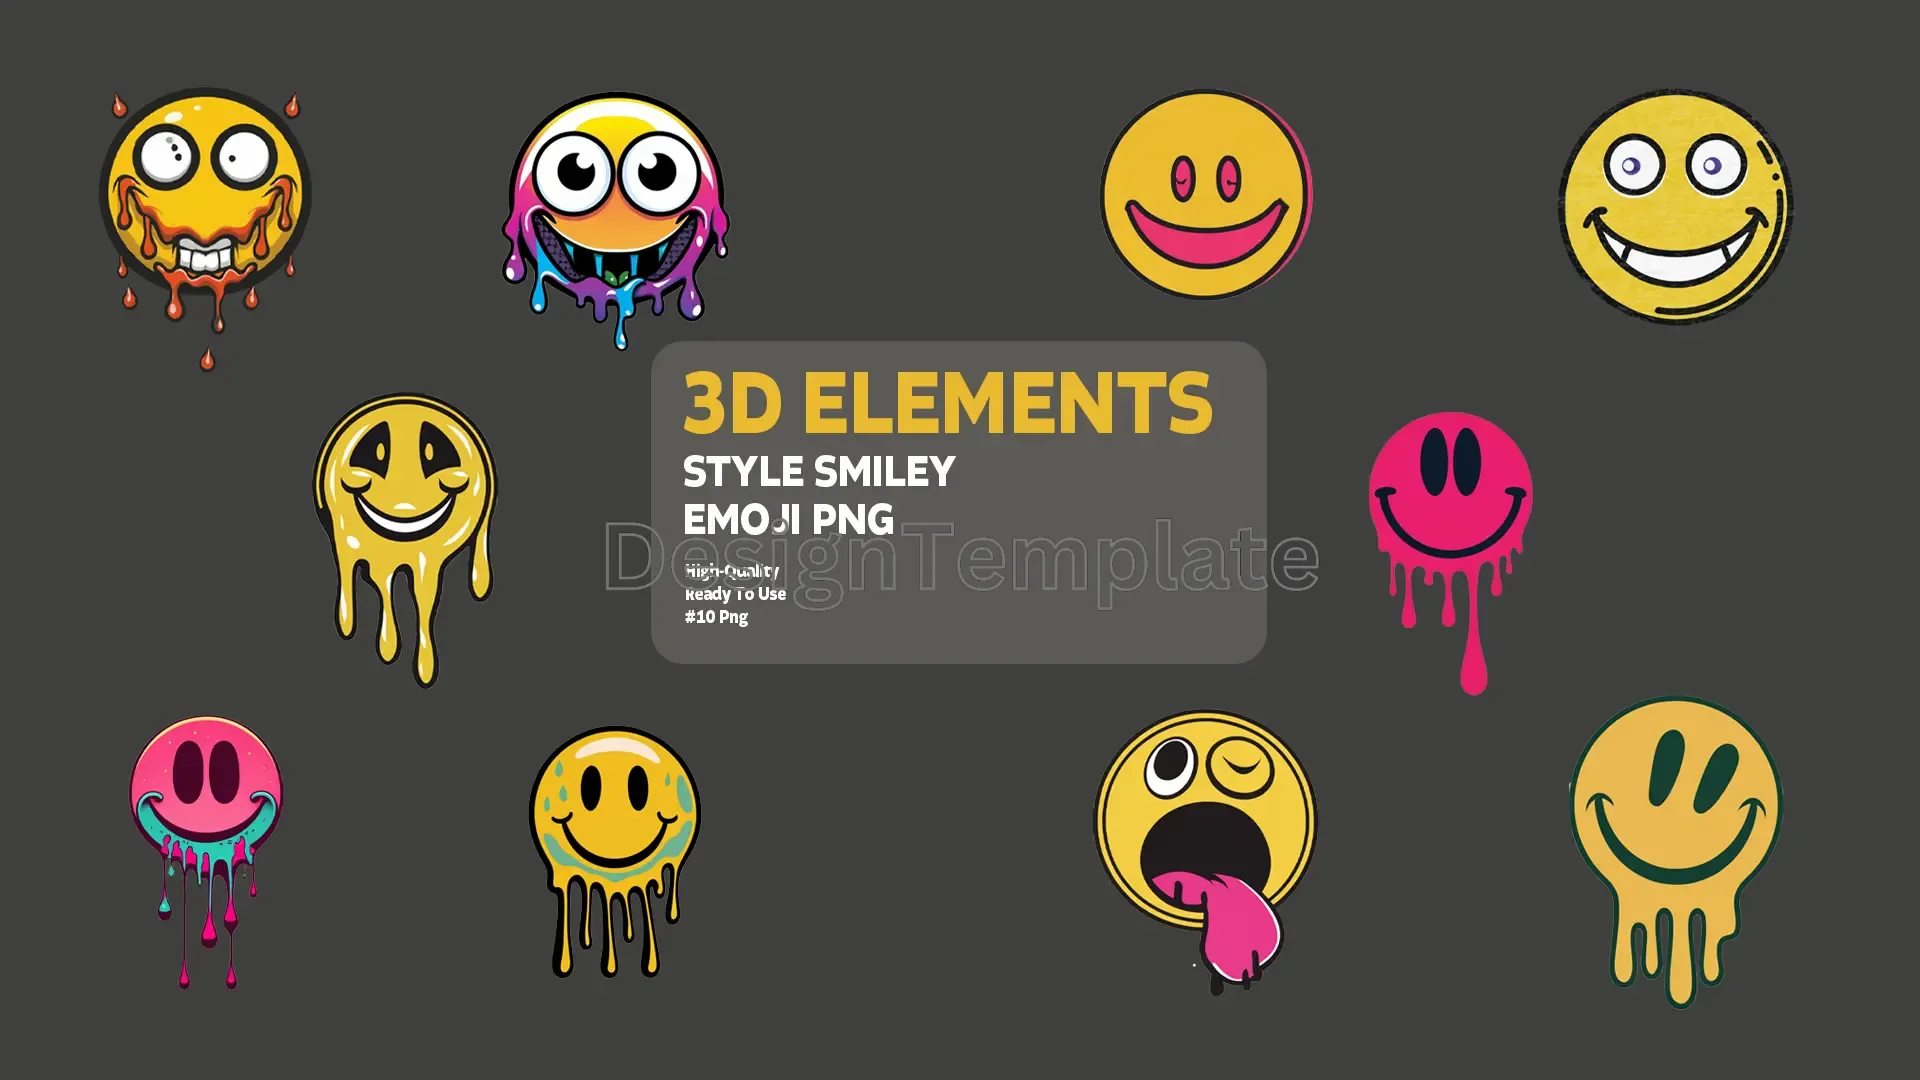 Express Yourself 3D Emoji Style Elements Graphics Pack image